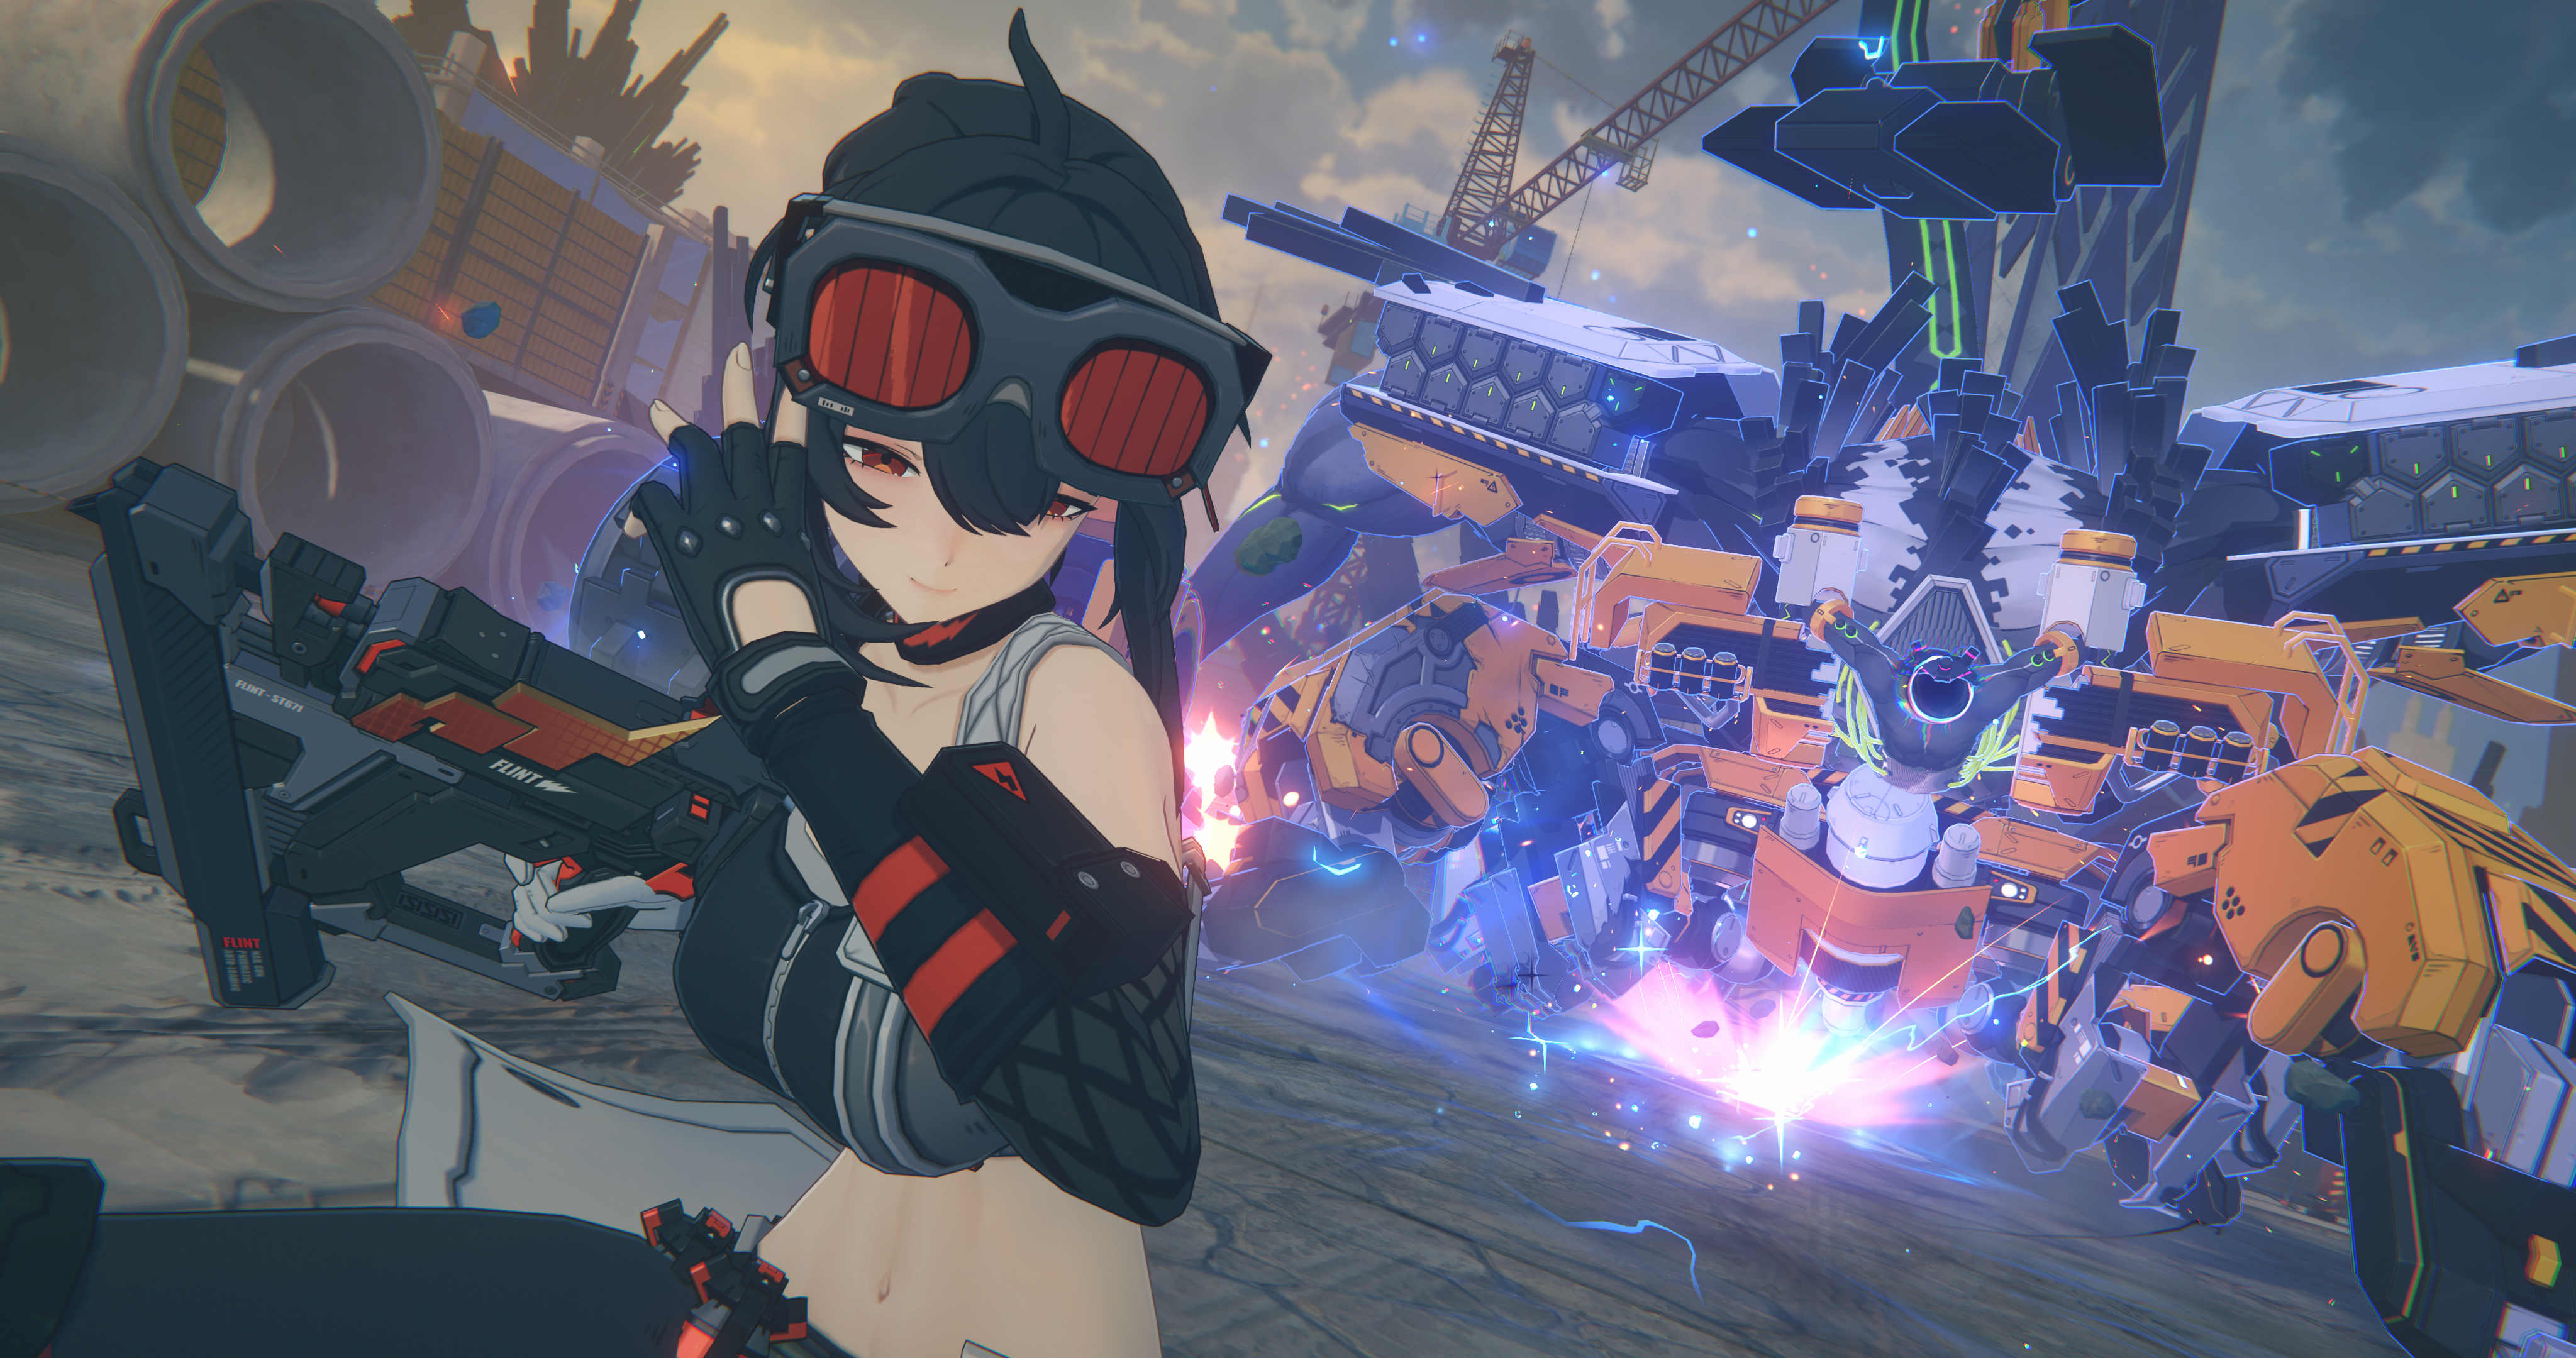 Zenless Zone Zero' release date, characters, and trailer for HoYoverse's  modern fantasy